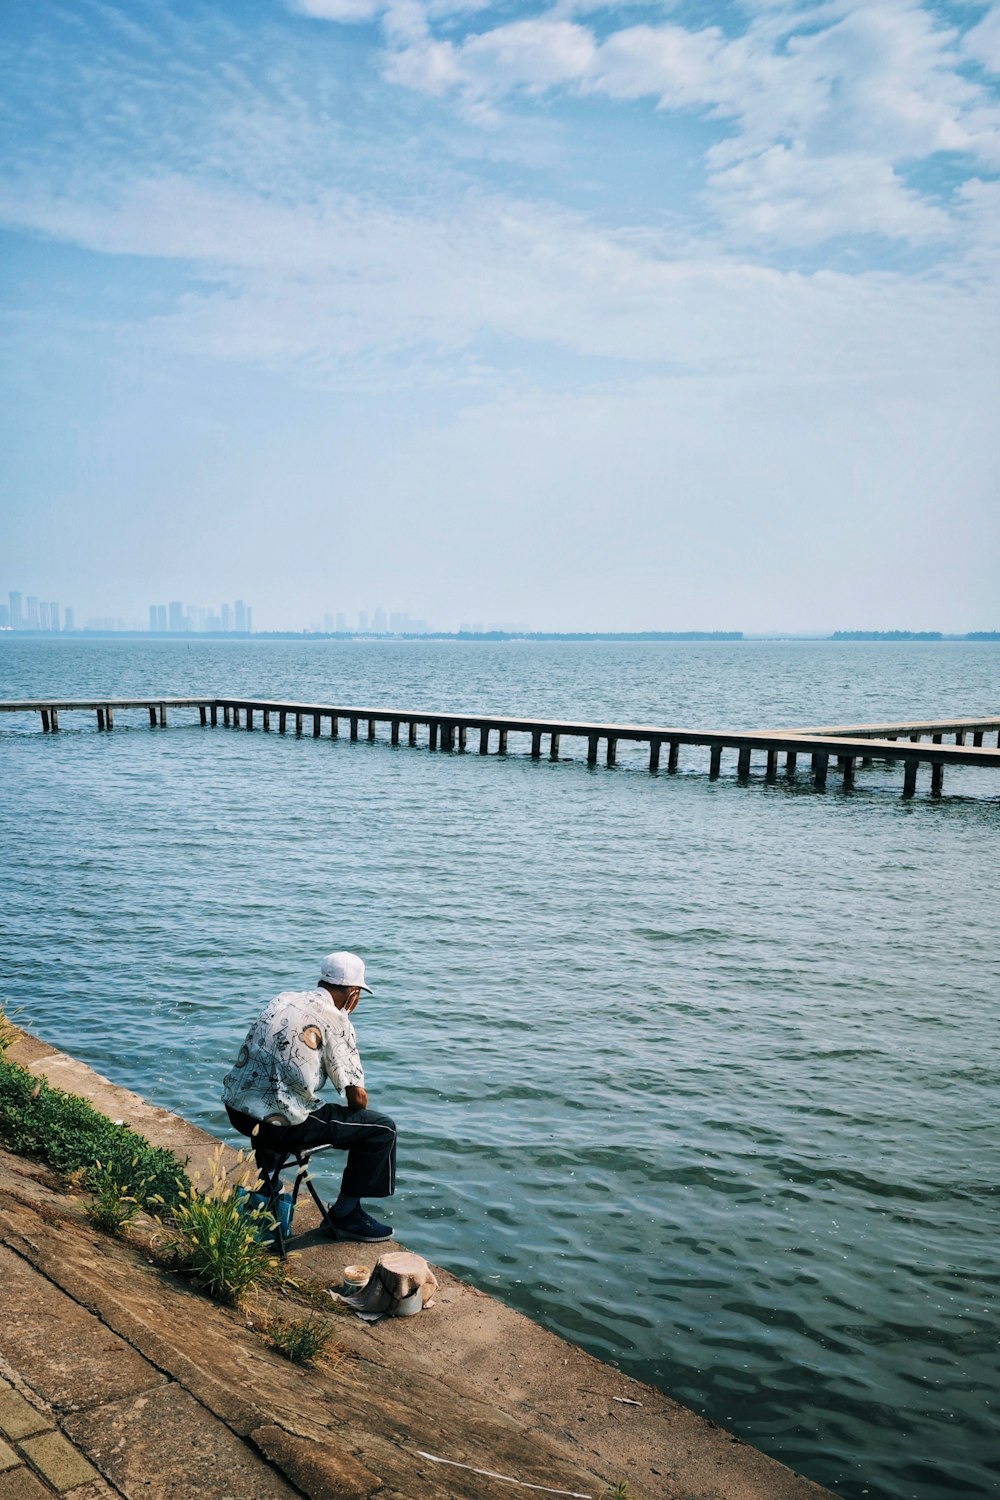 a man sitting on a bench by a body of water